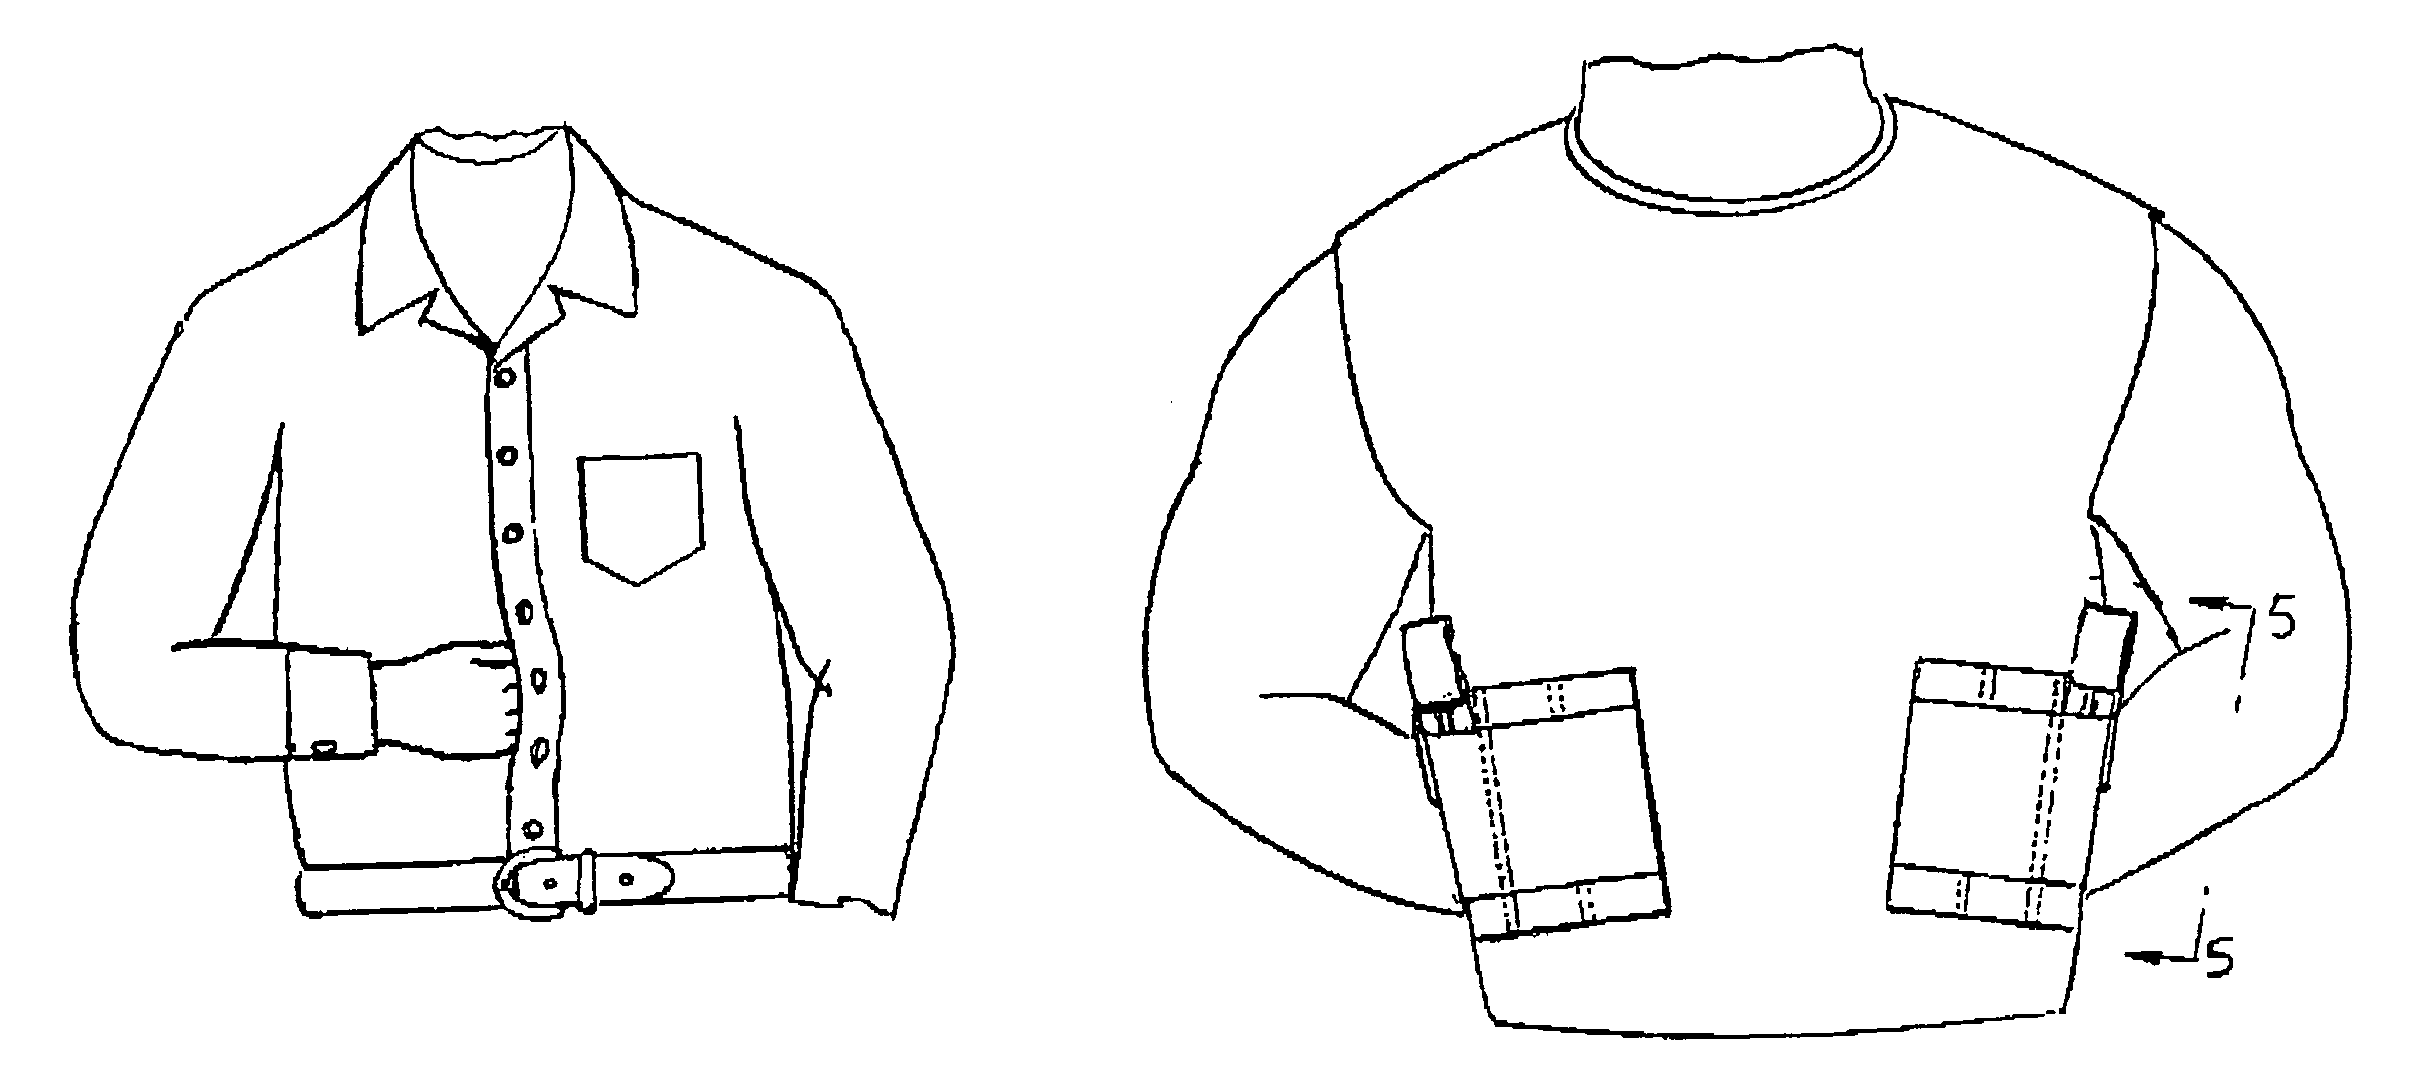 Combined concealed carry holster undergarment and outergarment with quick release and quick access mechanisms